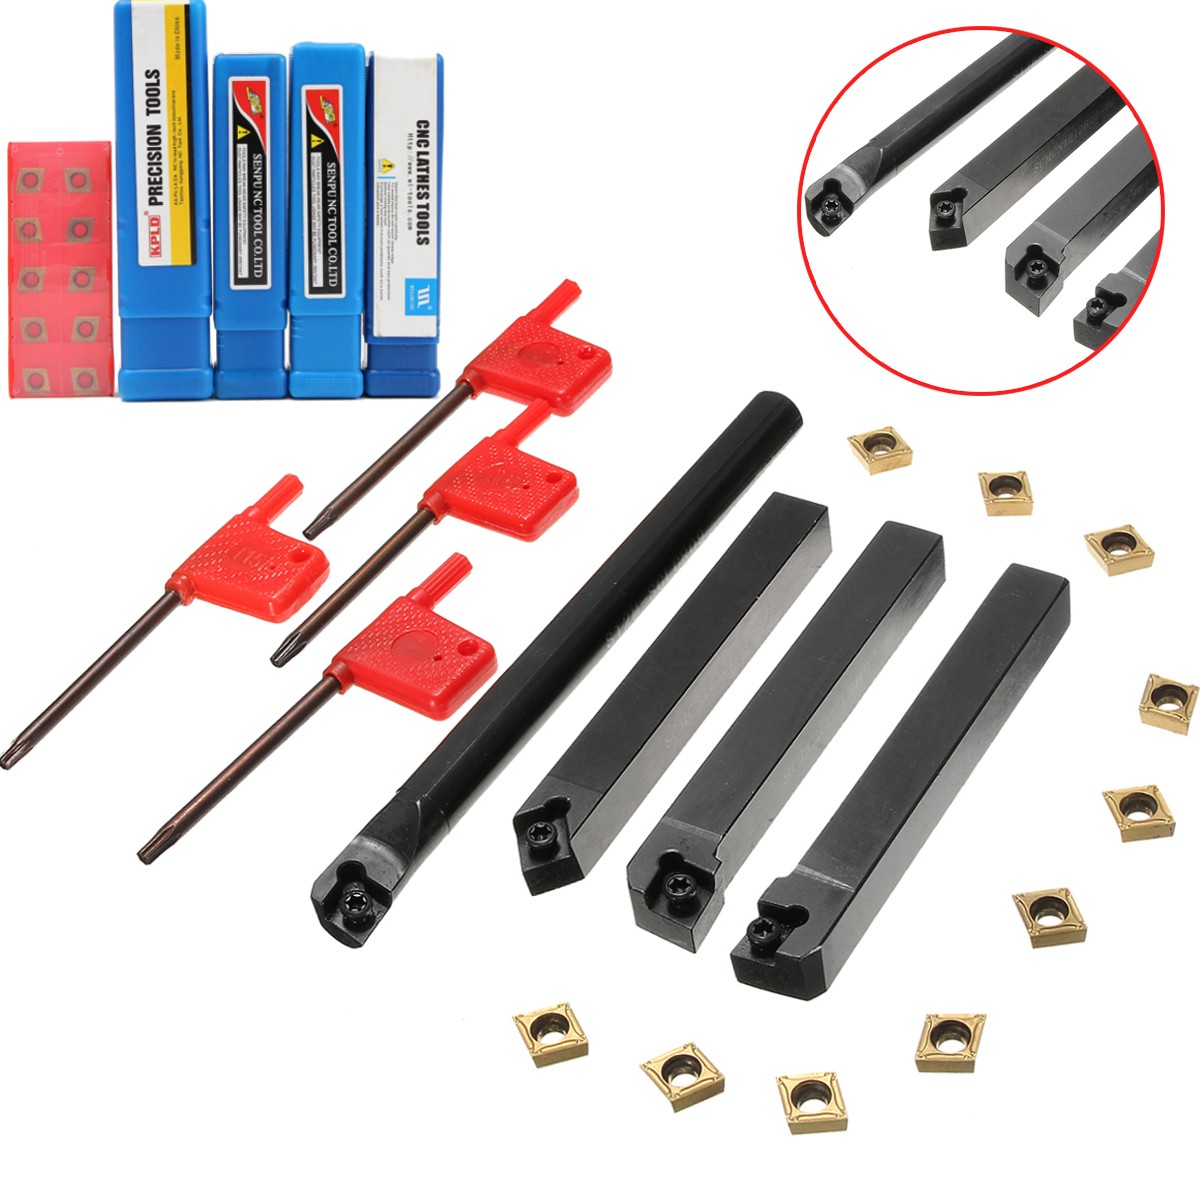 4pcs-12mm-Shank-External-Turning-Tool-with-CCMT09T304-Carbide-Inserts-CNC-Machine-Tools-Turning-1615867-3